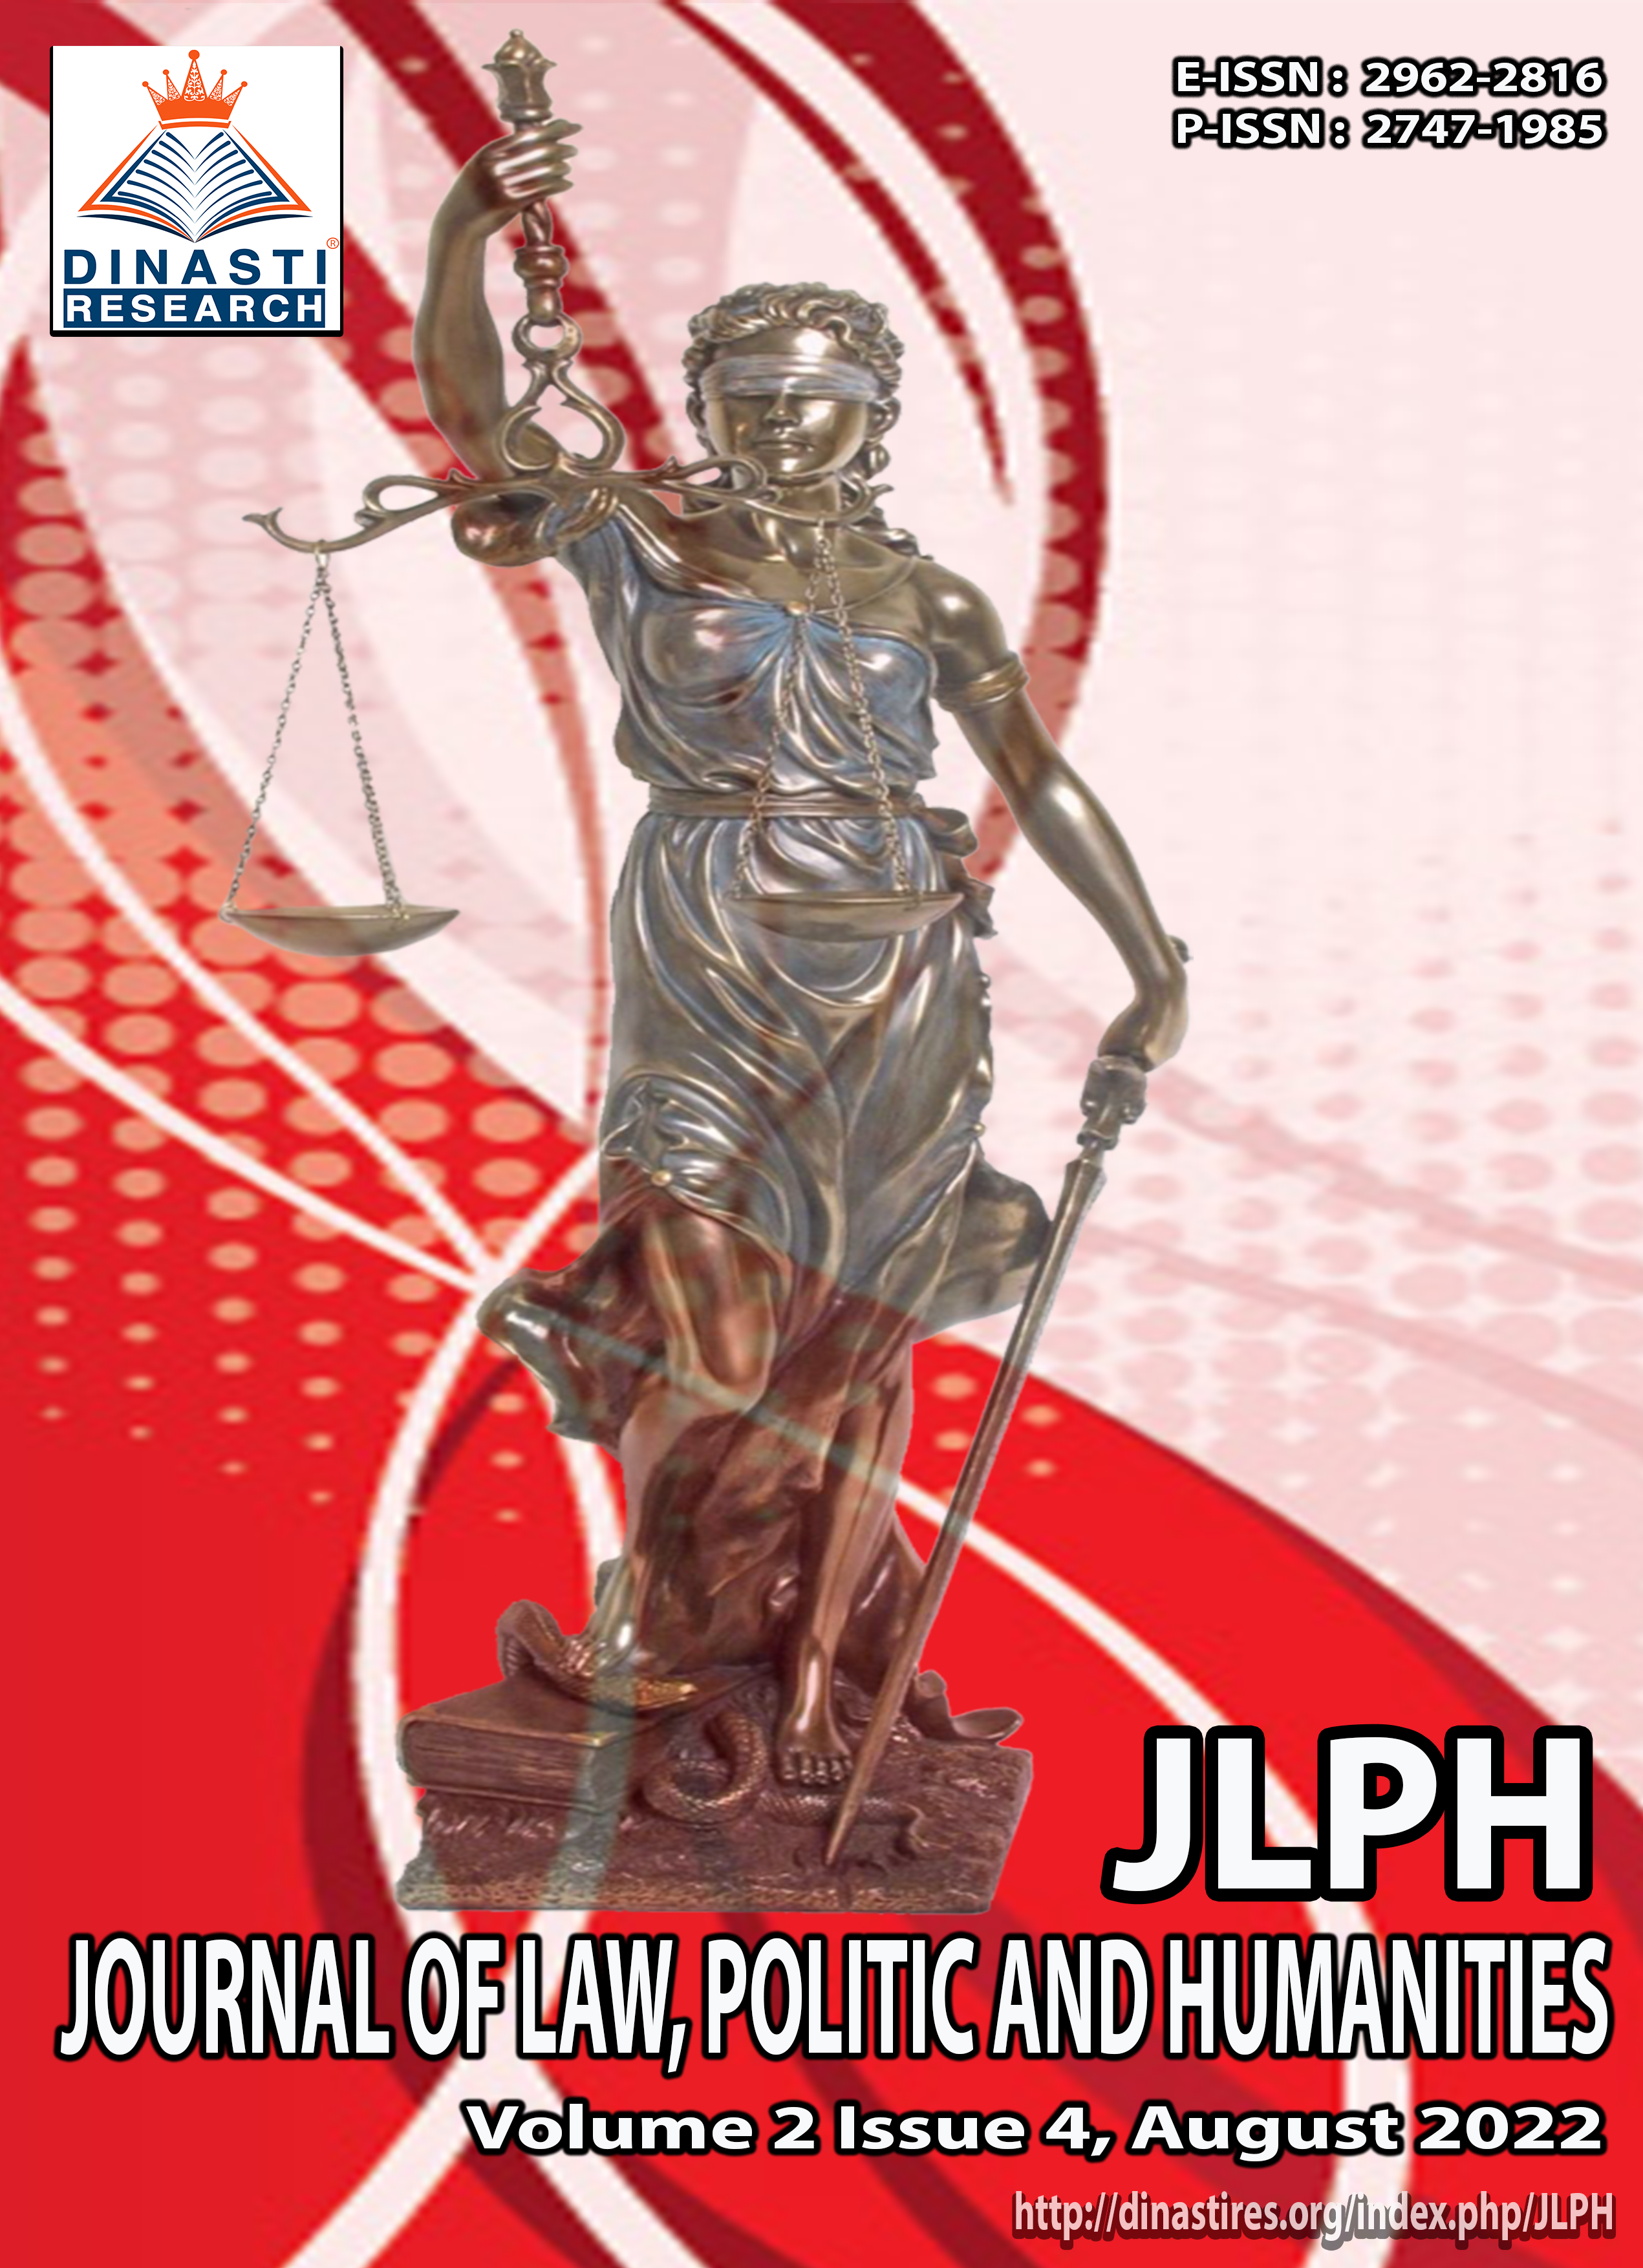 					View Vol. 2 No. 4 (2022): (JLPH) Journal of Law, Politic and Humanities (August 2022)
				